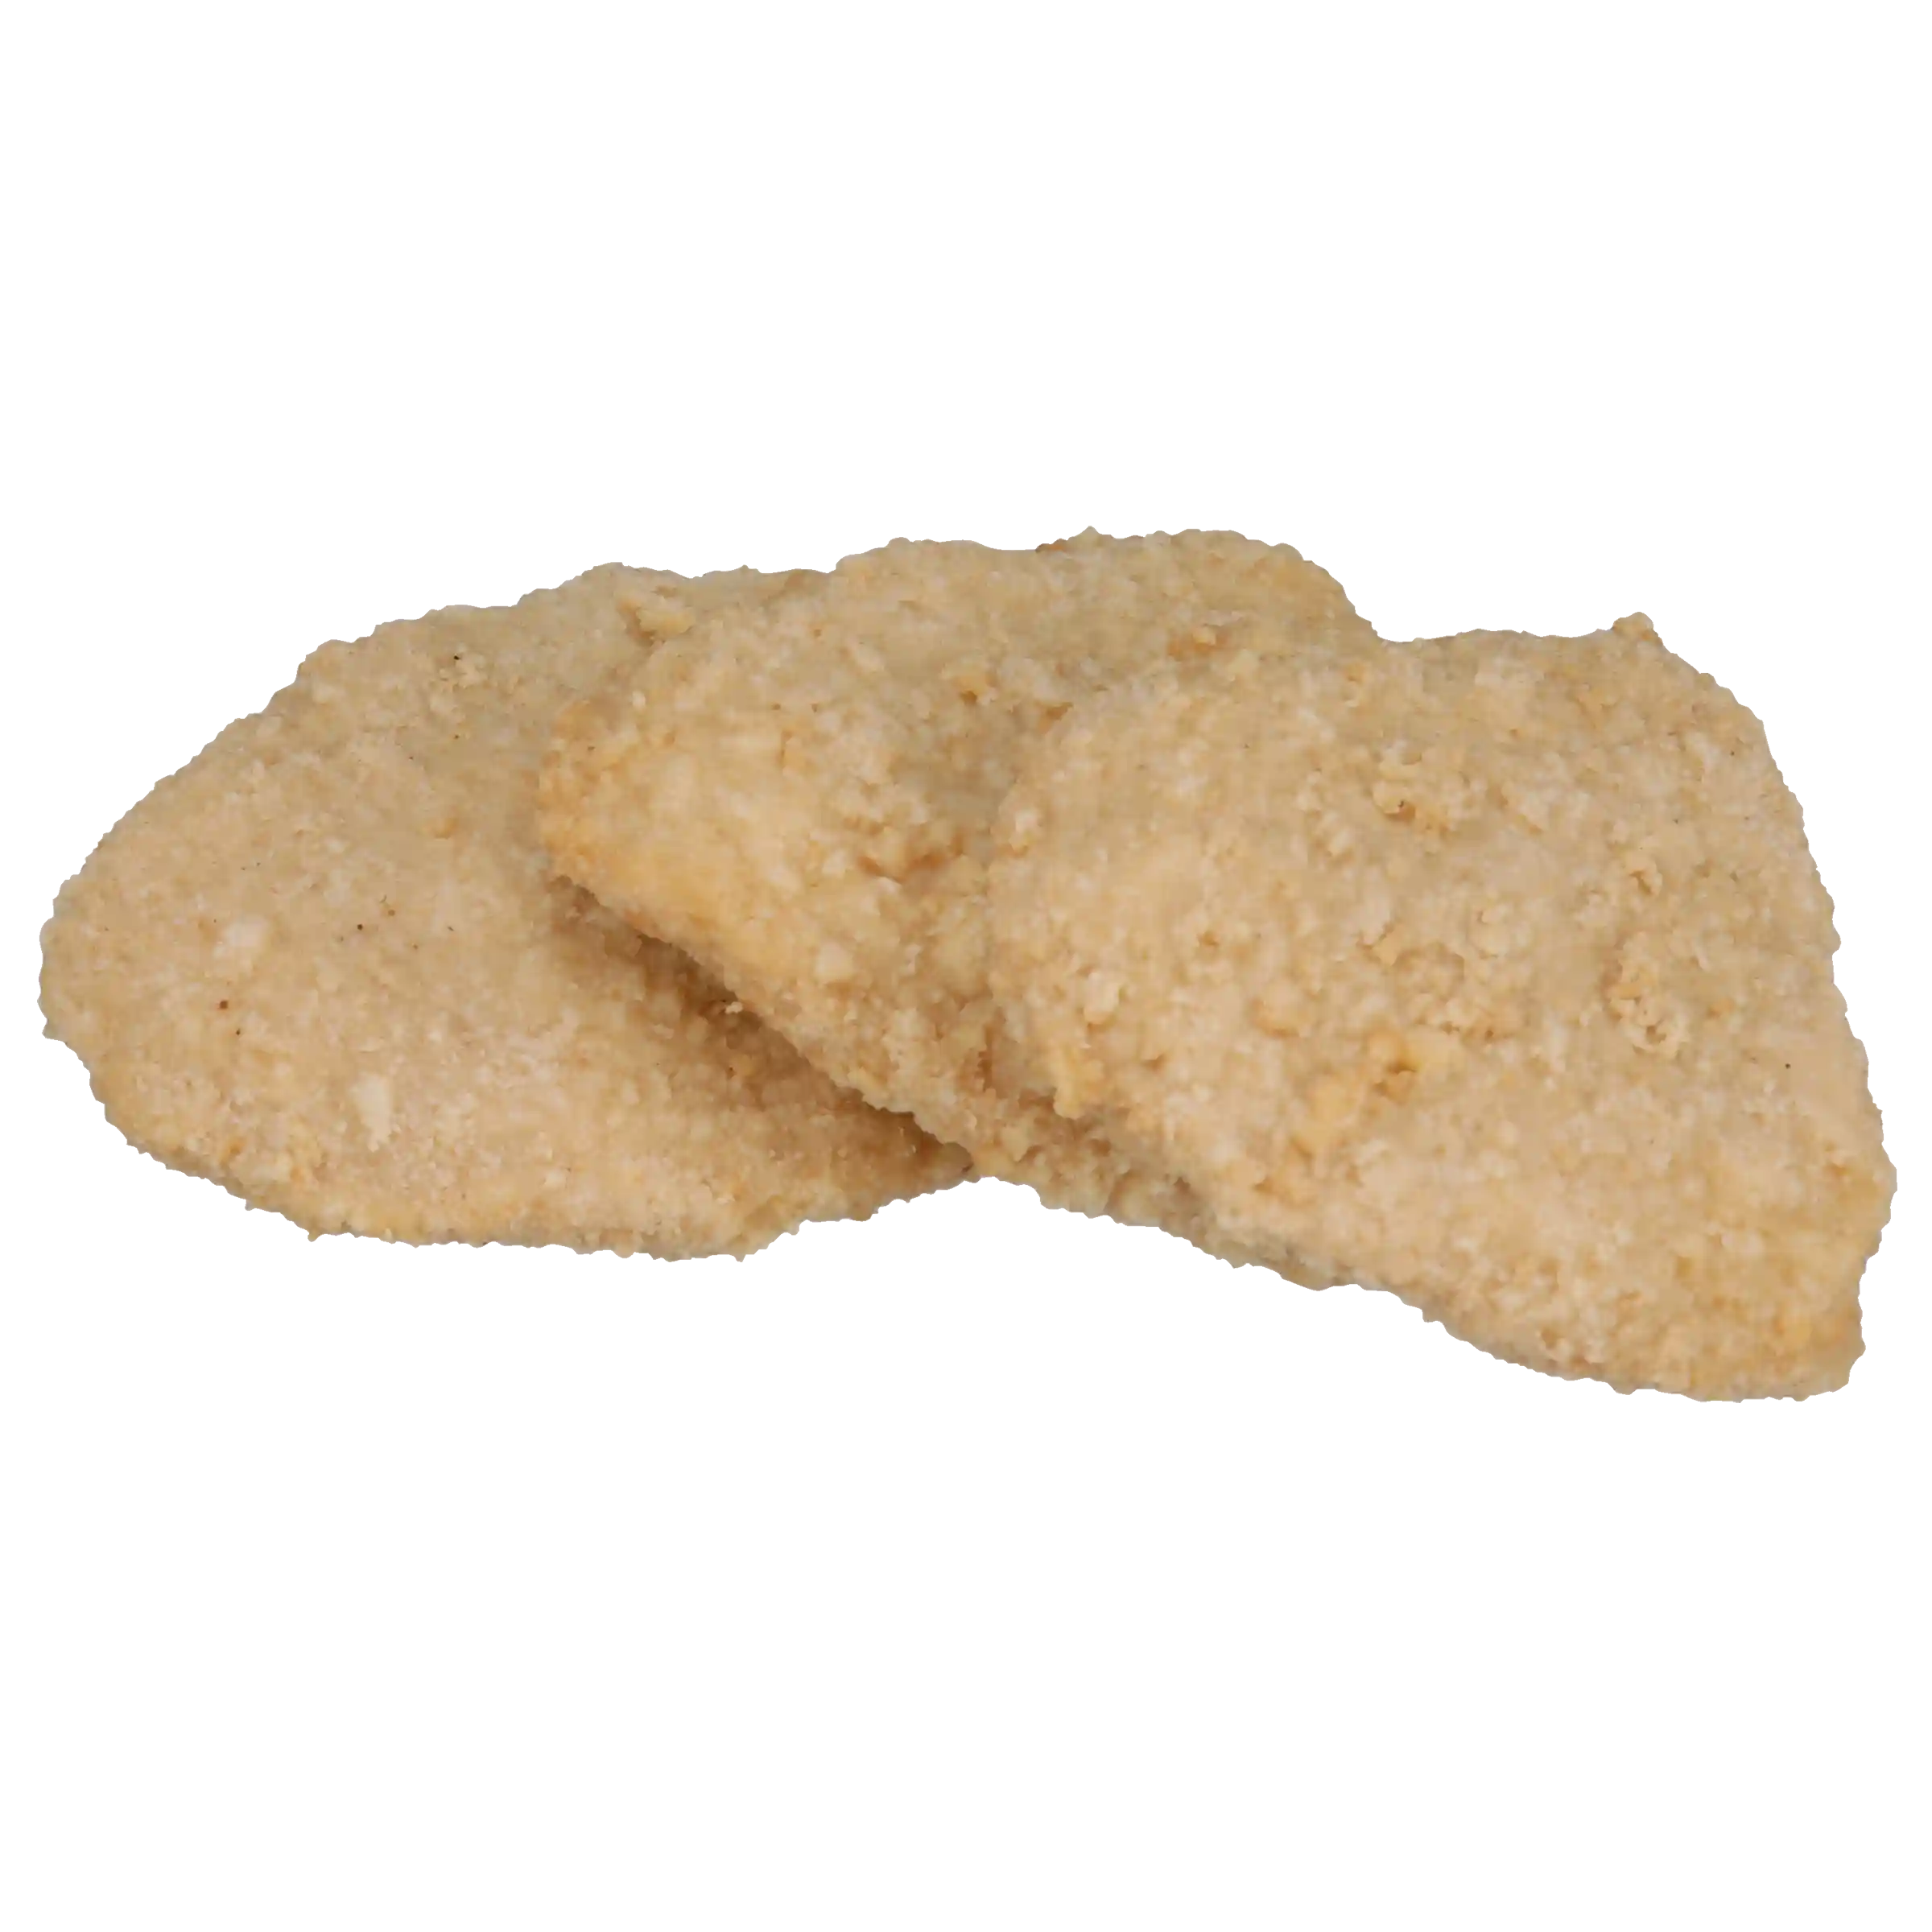 Tyson® Fully Cooked Whole Grain Breaded Golden Crispy Select Cut Chicken Breast Filets, CN, 3.75 oz. _image_11